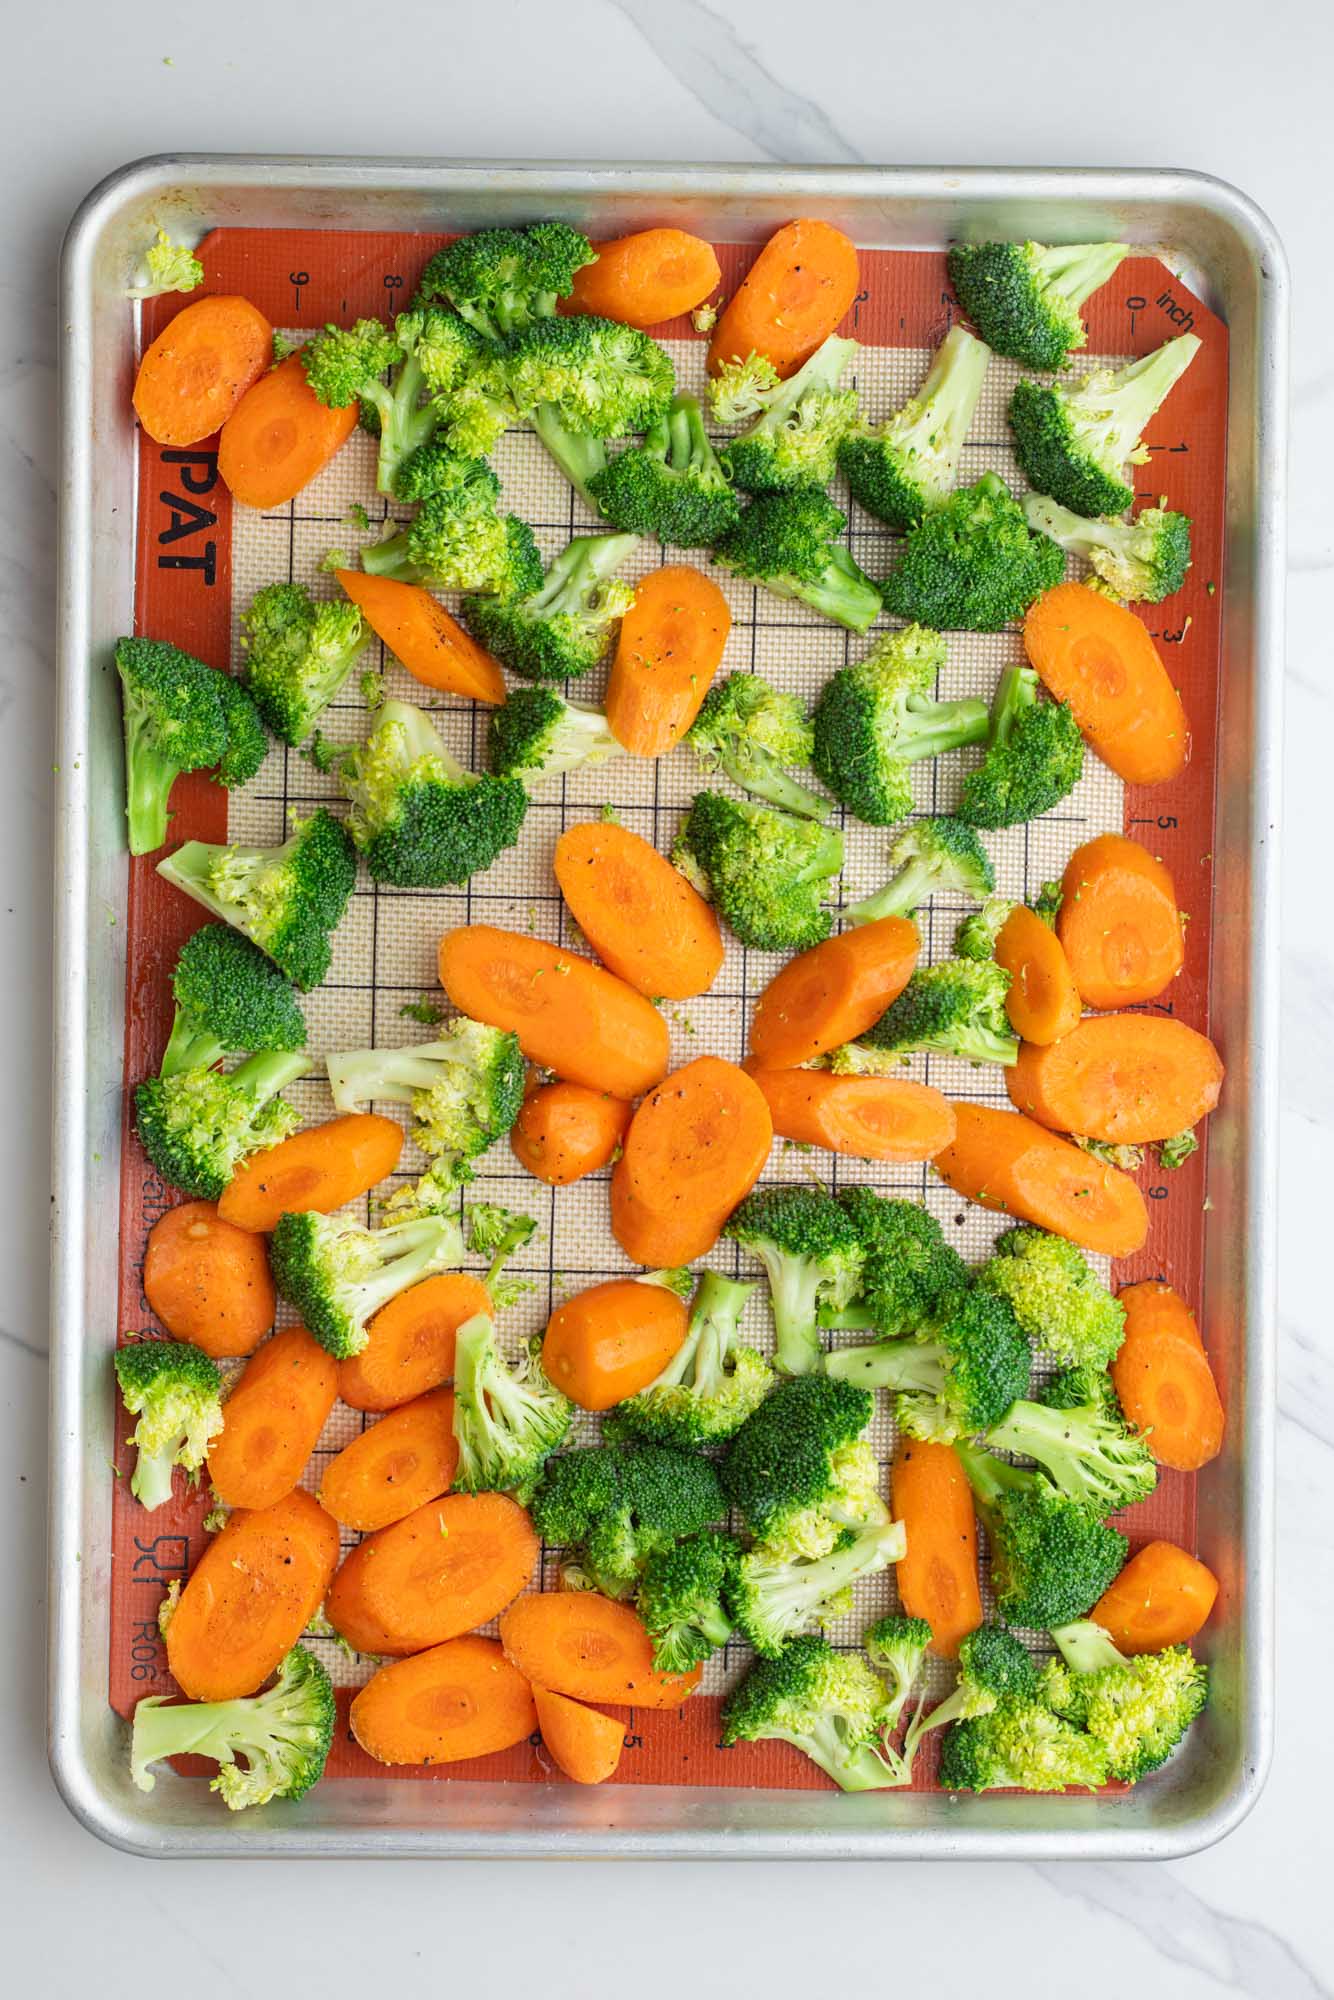 sliced carrots and broccoli florets on a silpat lined baking sheet, viewed from above